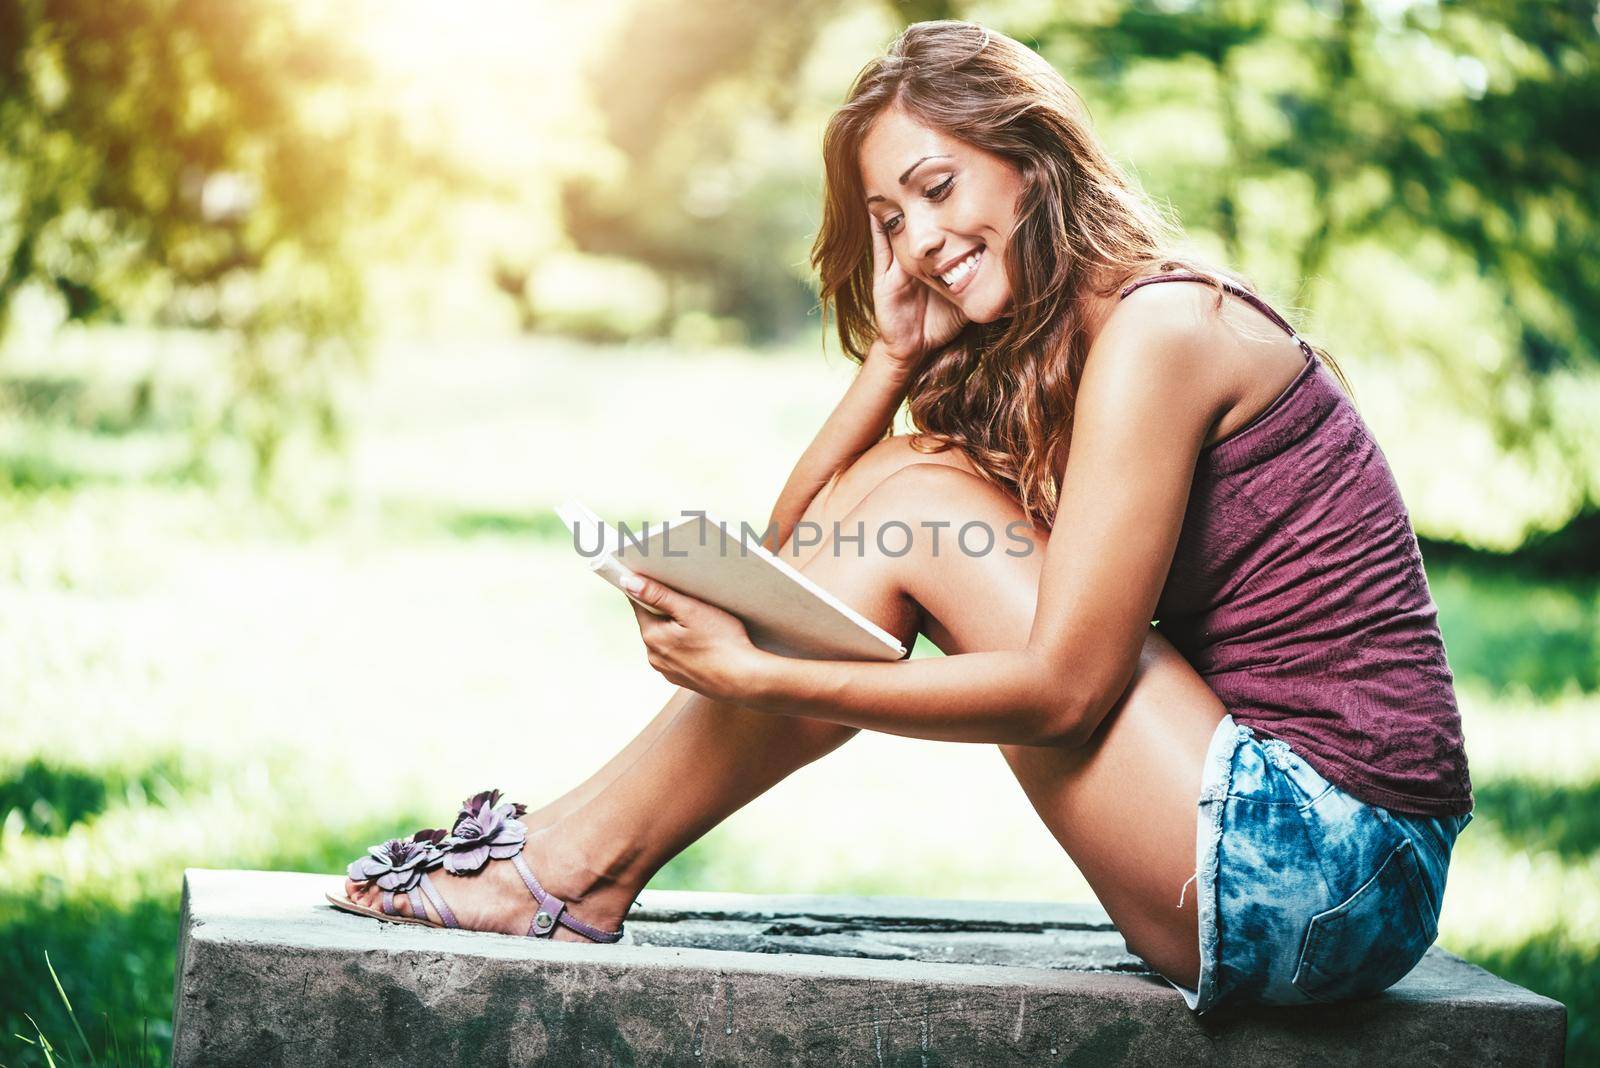 Attractive young woman is enjoying her time outside reading book in park with sunset in background.